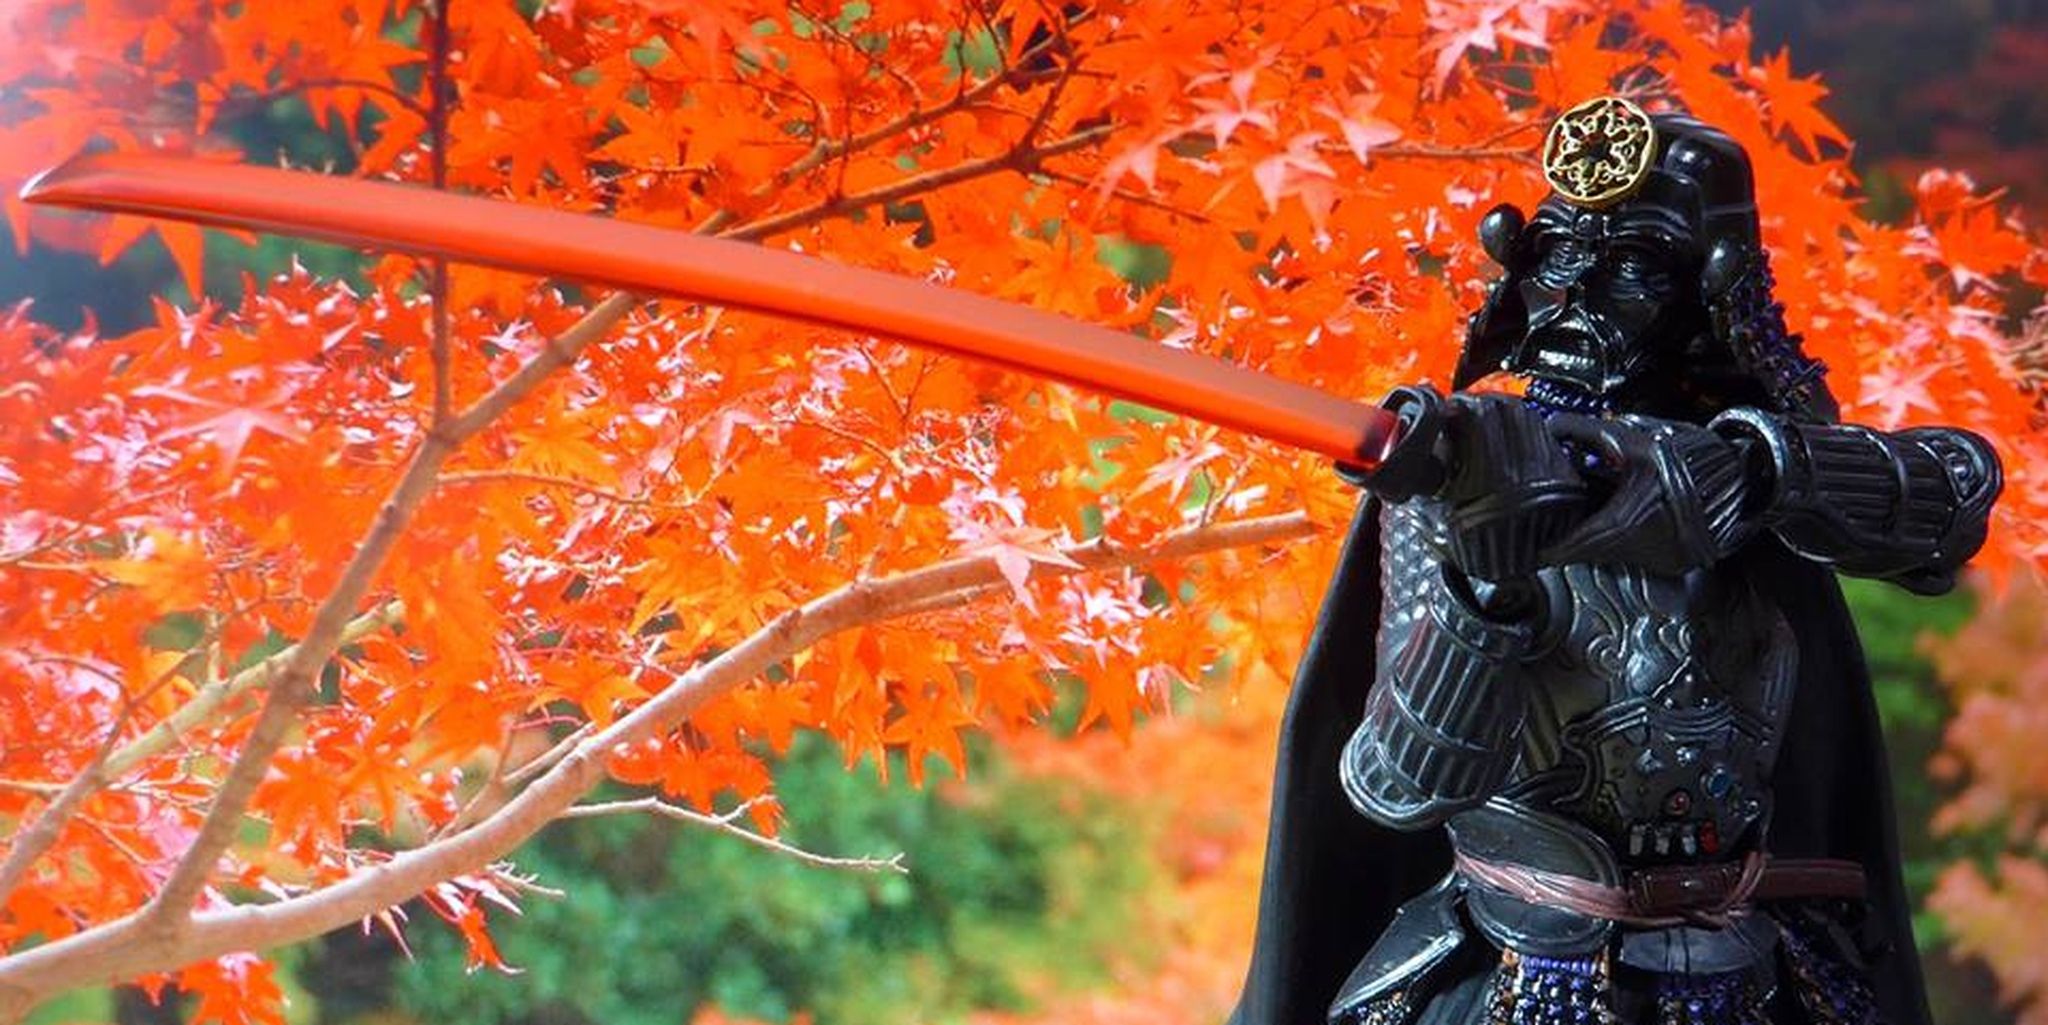 Darth Vader reimagined as a samurai is incredible. The Daily Dot